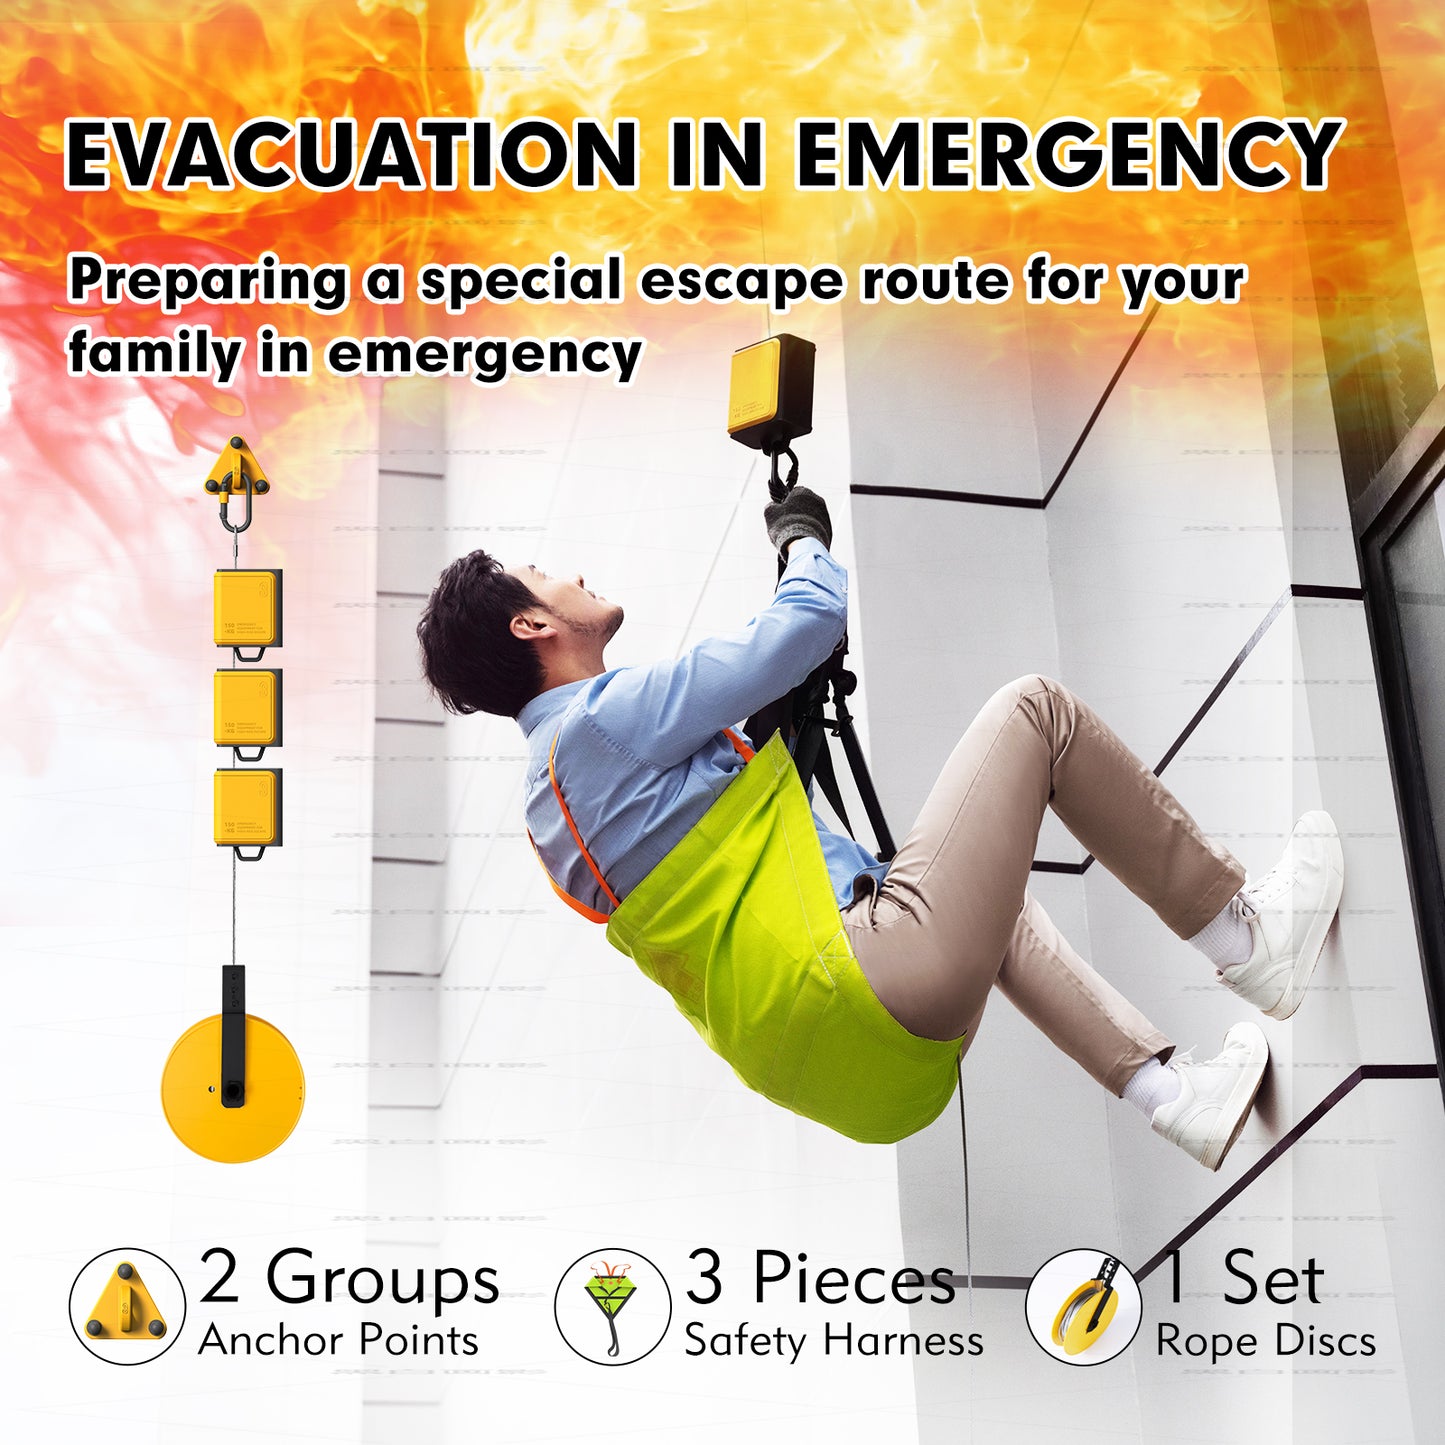 3S LIFT 3-engine version rescue unit, evacuation and rescue unit for 3-6 people family fire escape, essential for families living in medium to high altitude 195 feet for 2-18 floors